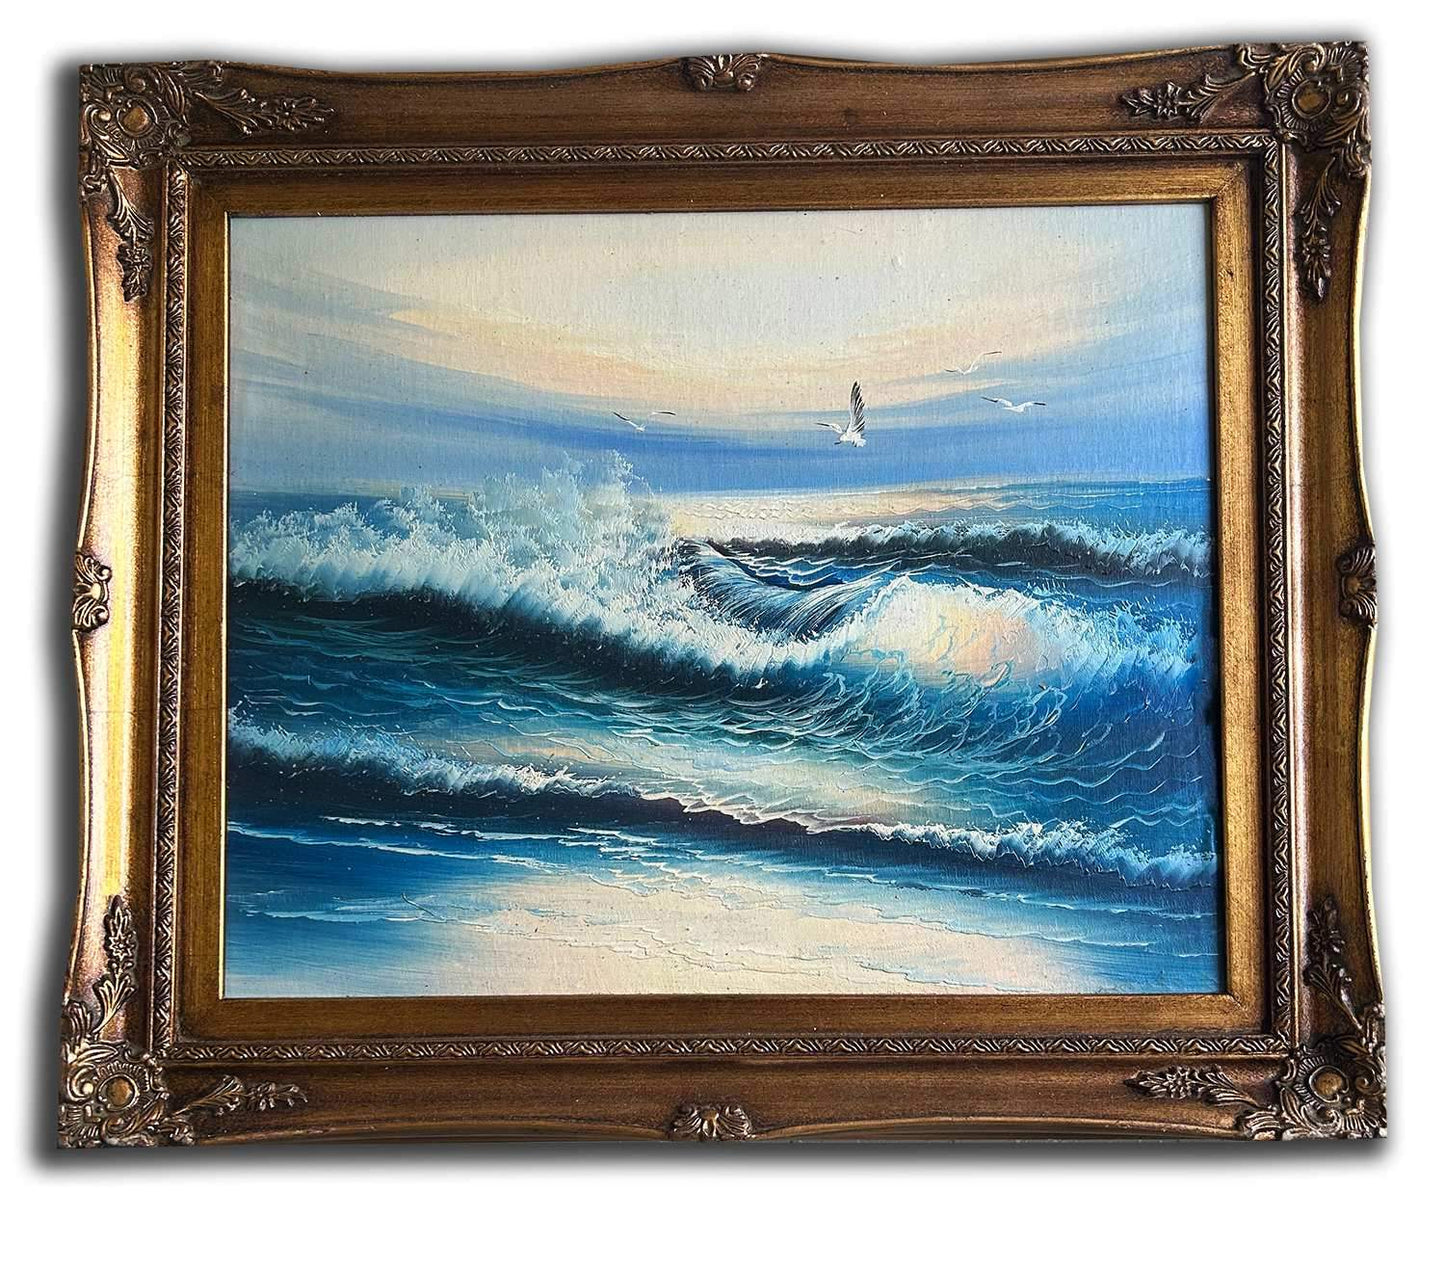 The sea, hand-painted oil painting, 54x64 cm or 21x25 ins